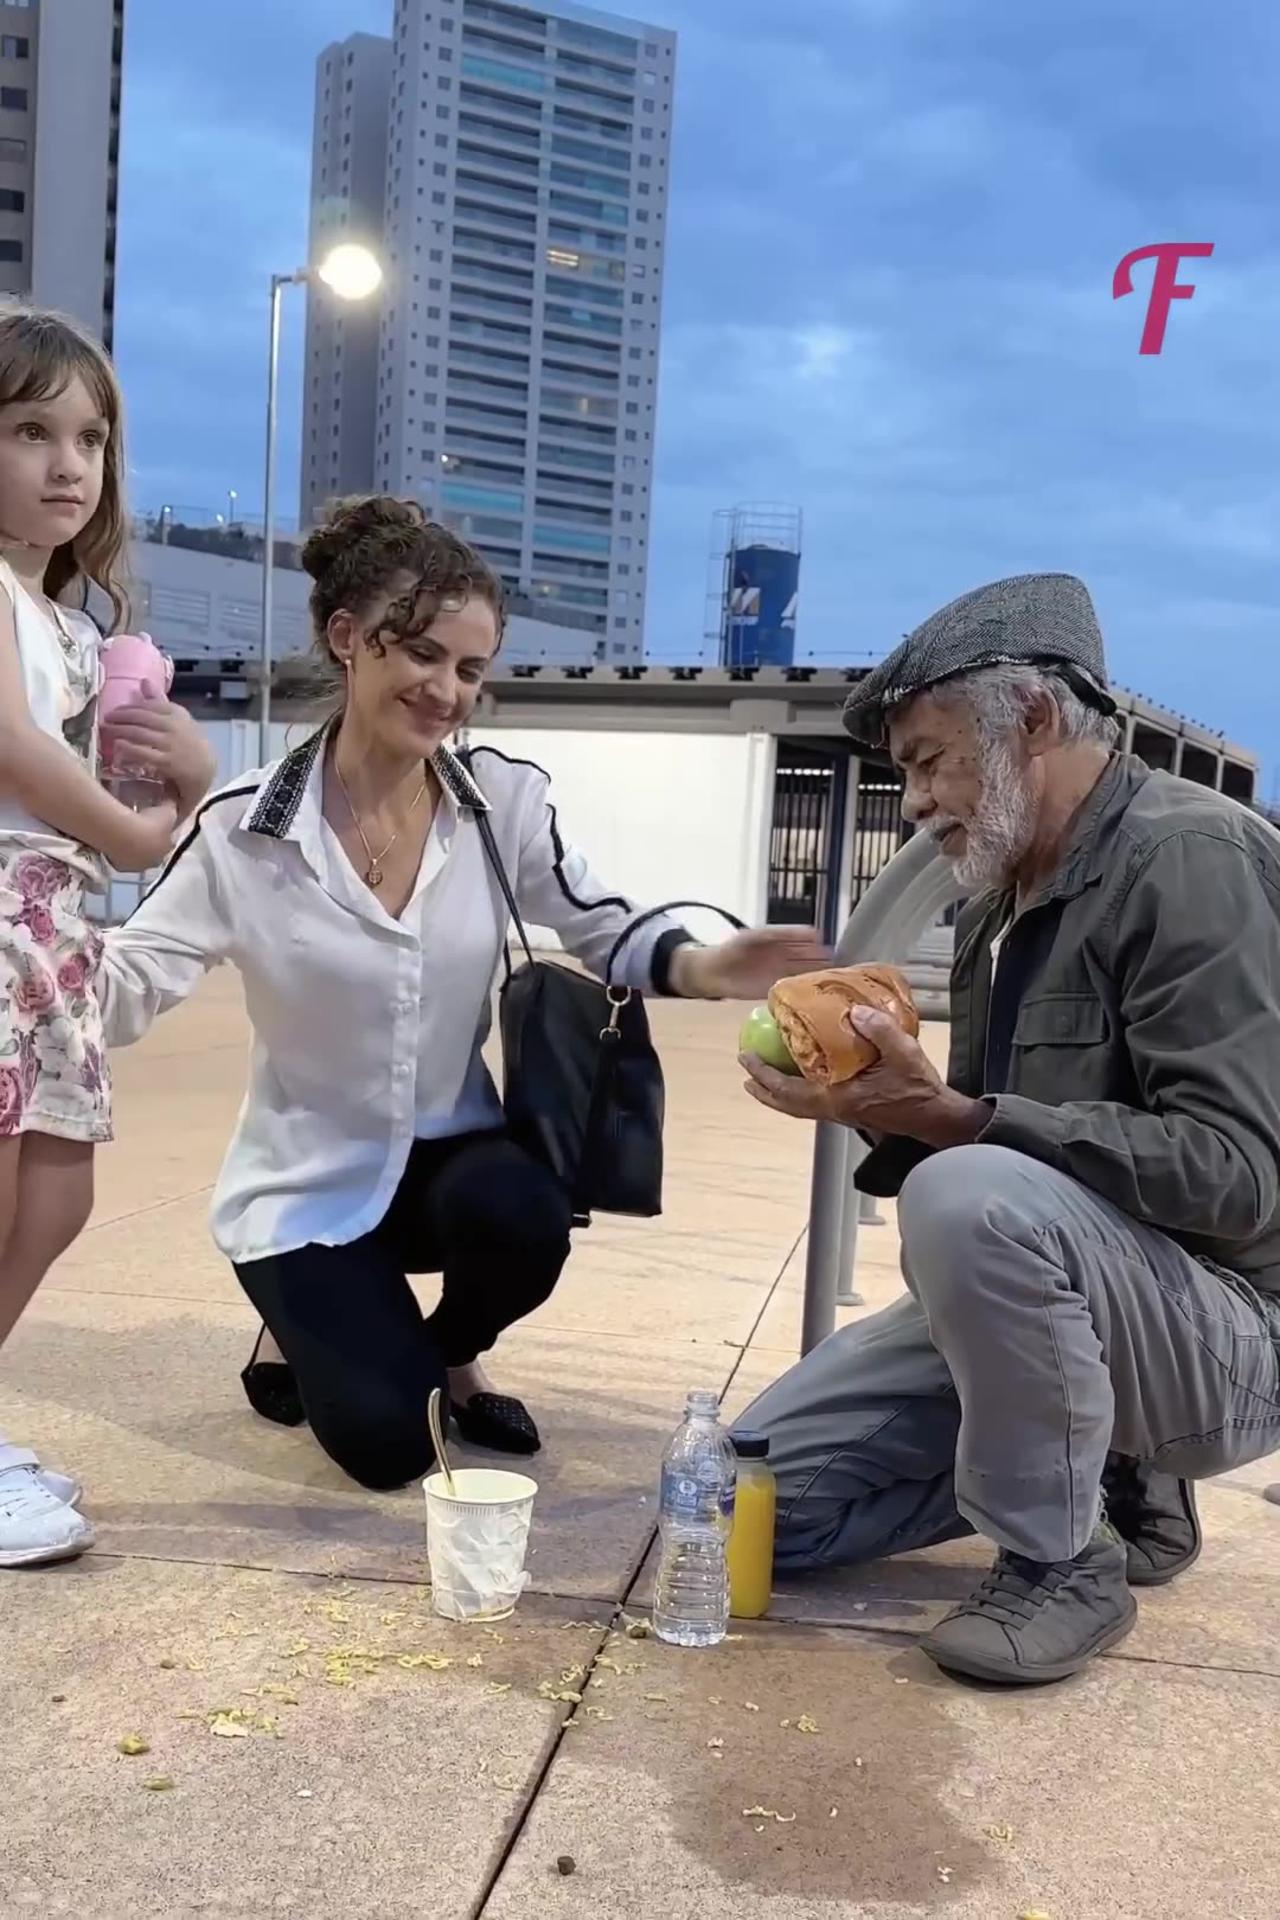 A mother and daughter extend a helping hand to a homeless man